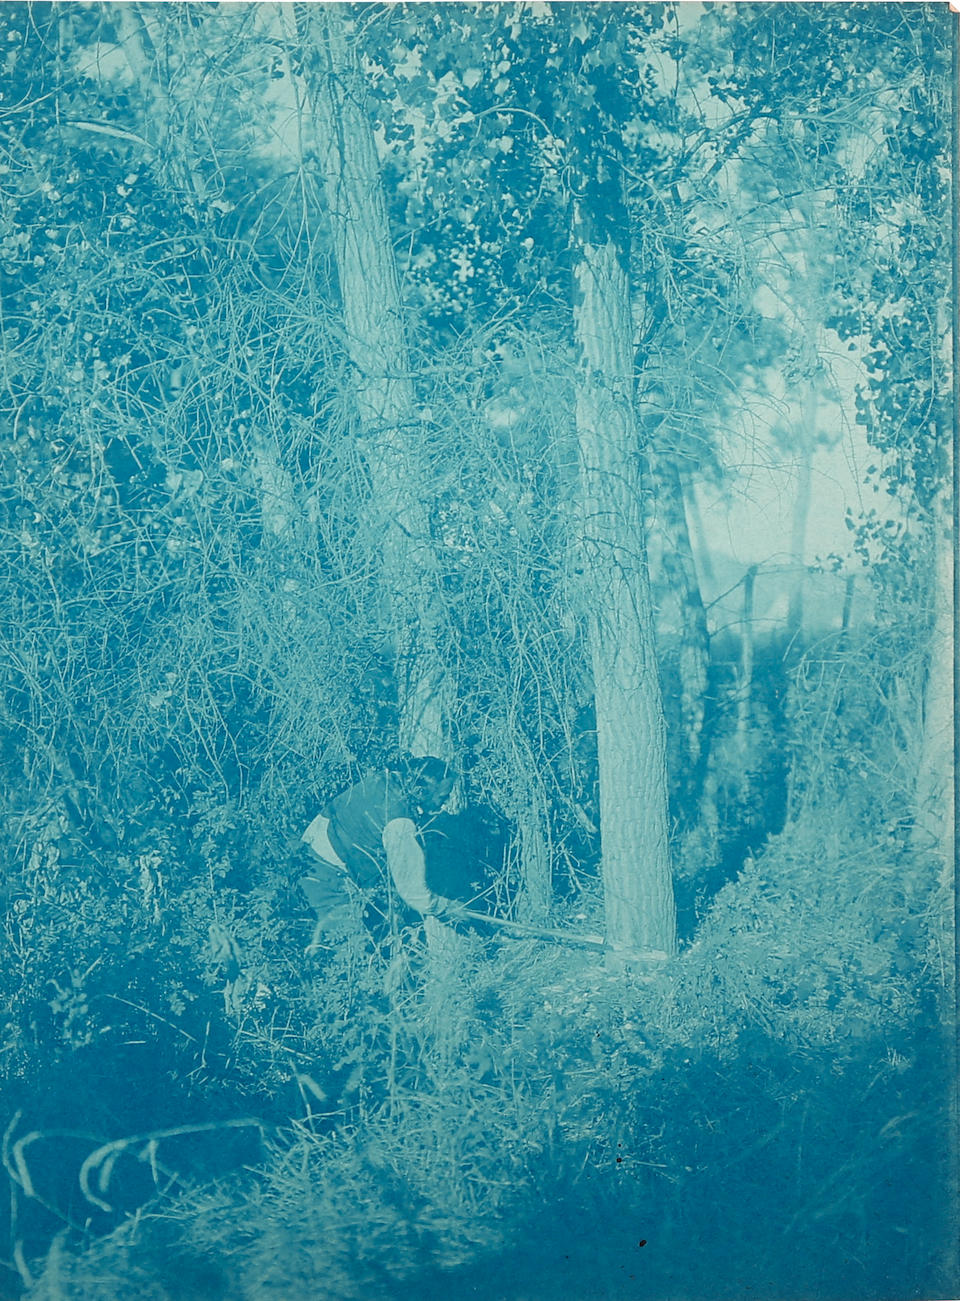 A GROUP OF CURTIS CYANOTYPES FROM VOLUME VI OF NORTH AMERICAN INDIAN. CURTIS, EDWARD S. 1872-1954. 26 cyanotypes, featuring images of Cheyenne tribes from Volume VI, including portraits, still lifes, and photographs made en plein air, many of which are related to or variants of published images, the images measuring approximately 8 x 6 inches (203 x 152 mm), all numbered in grease pencil on the reverse and a few additionally titled and annotated, c.1907.